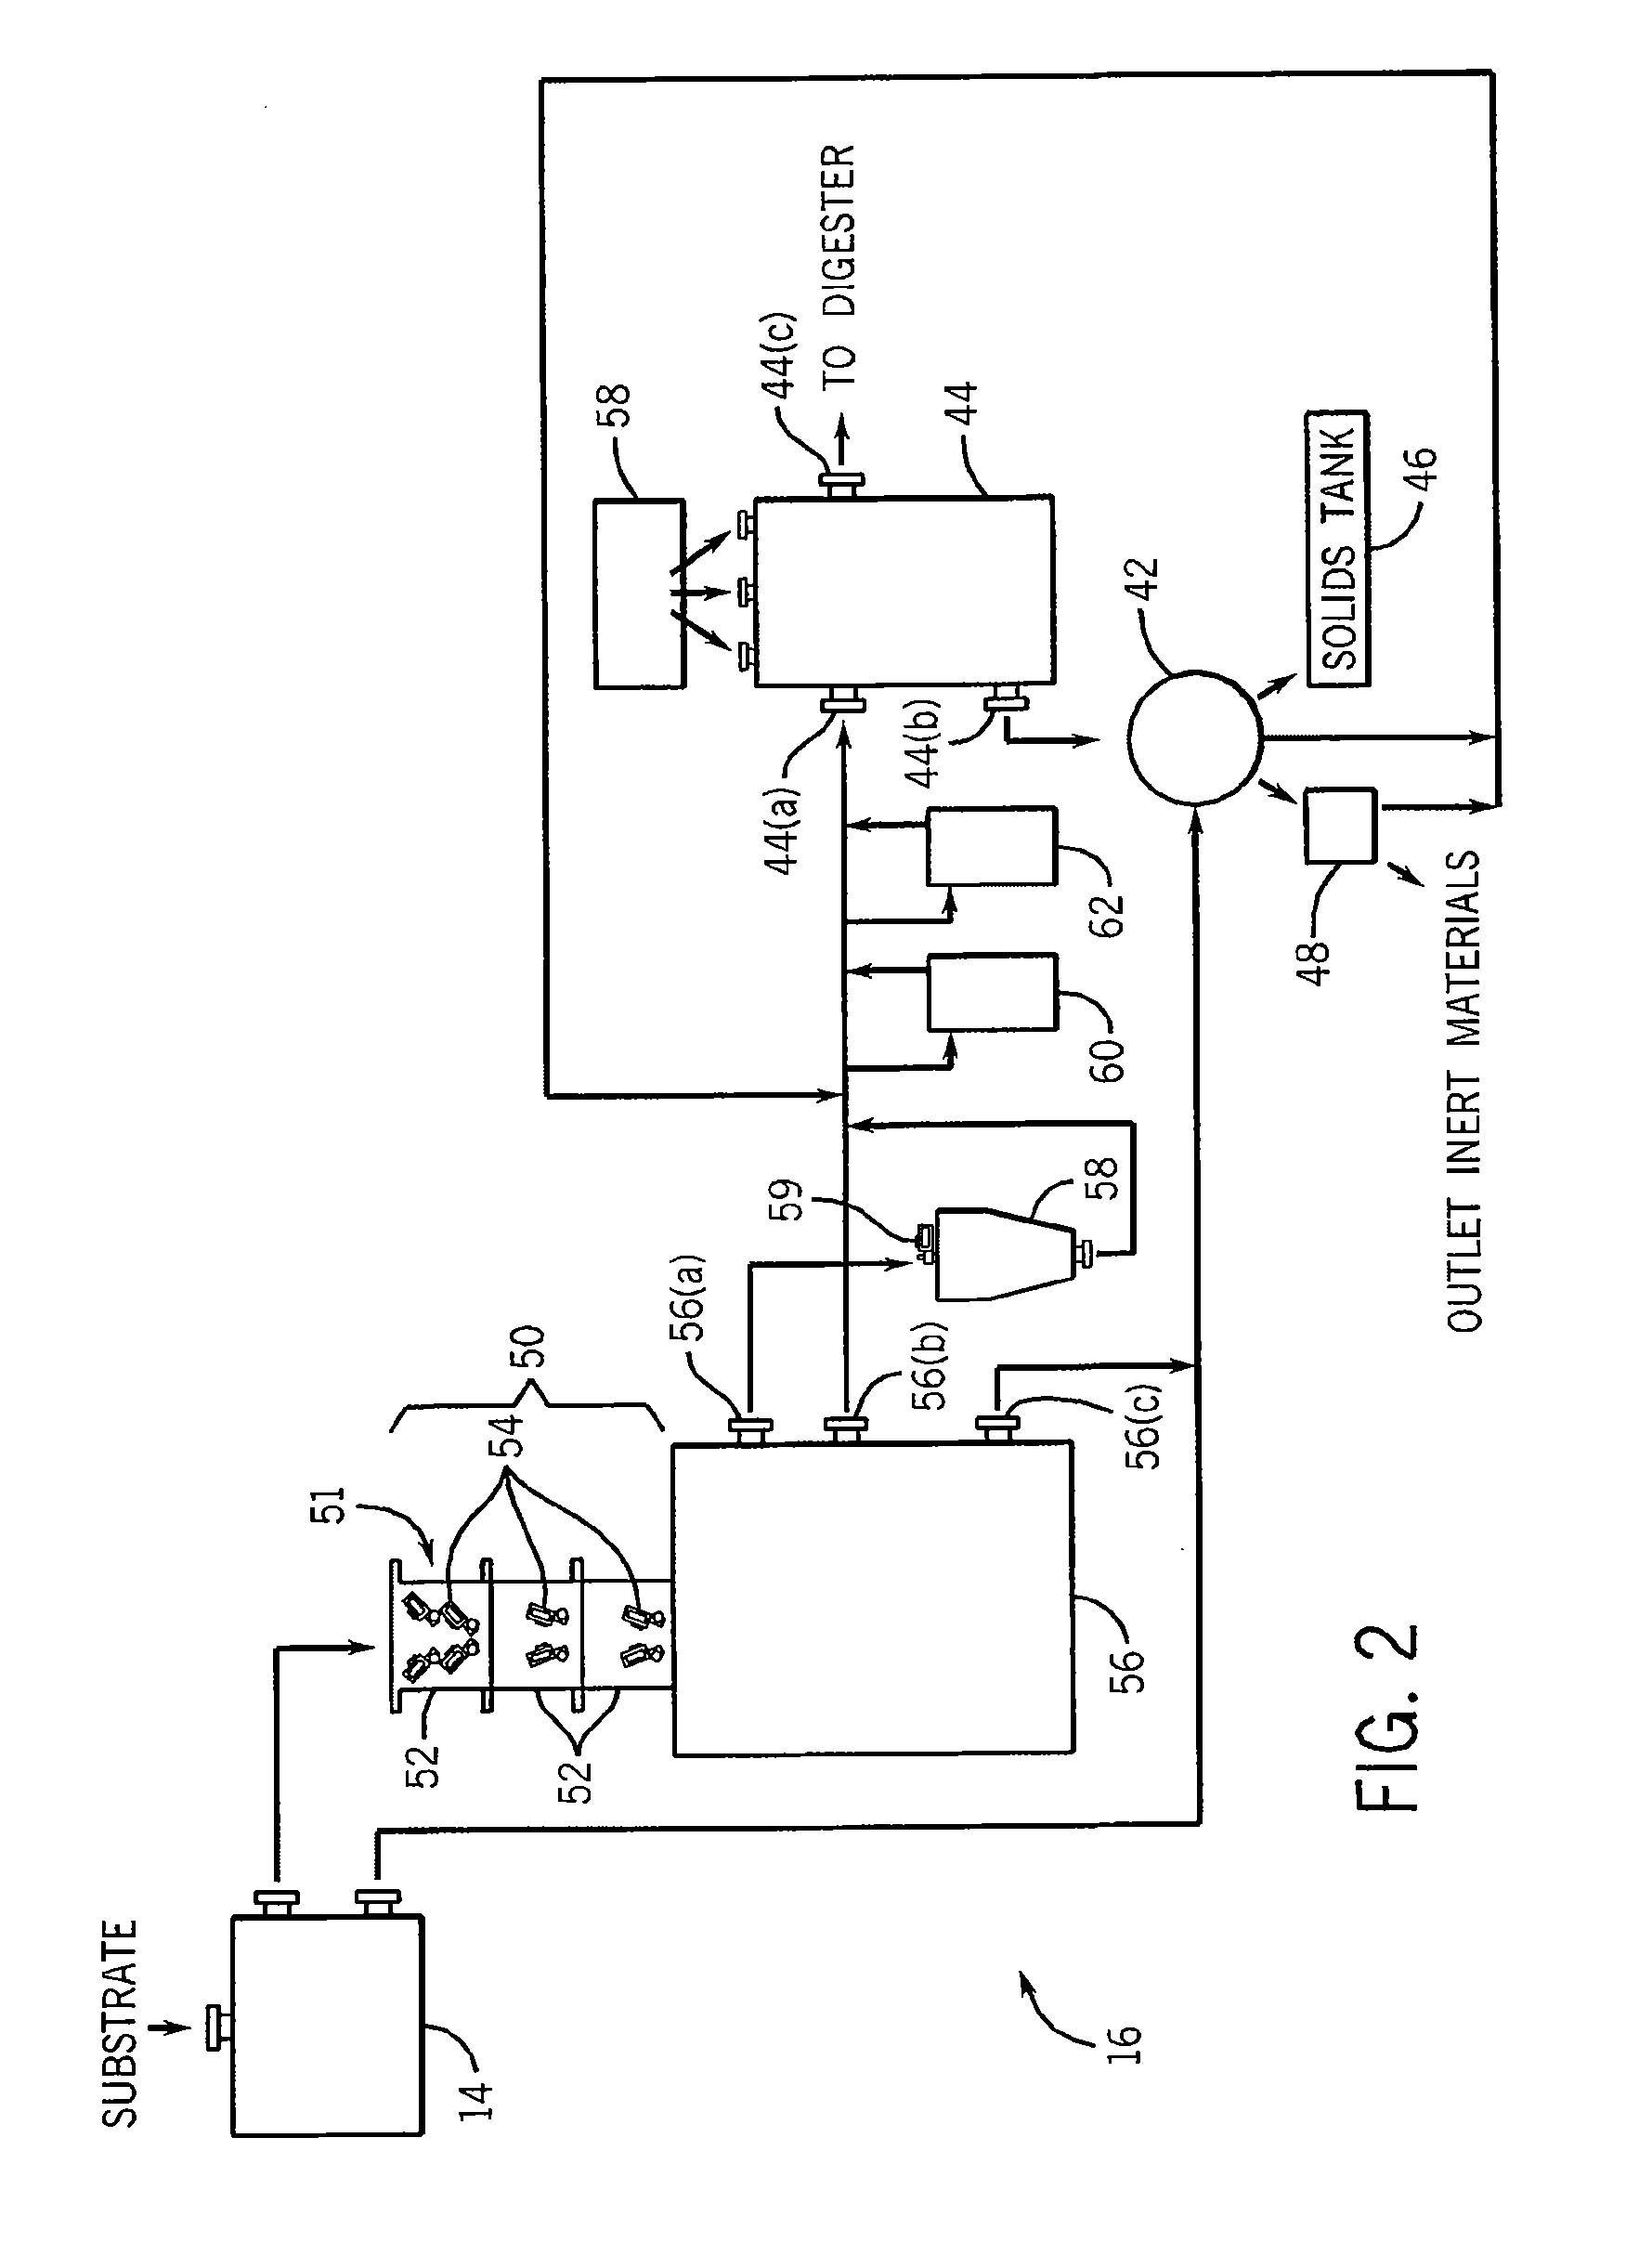 Organic Substrate Treatment System